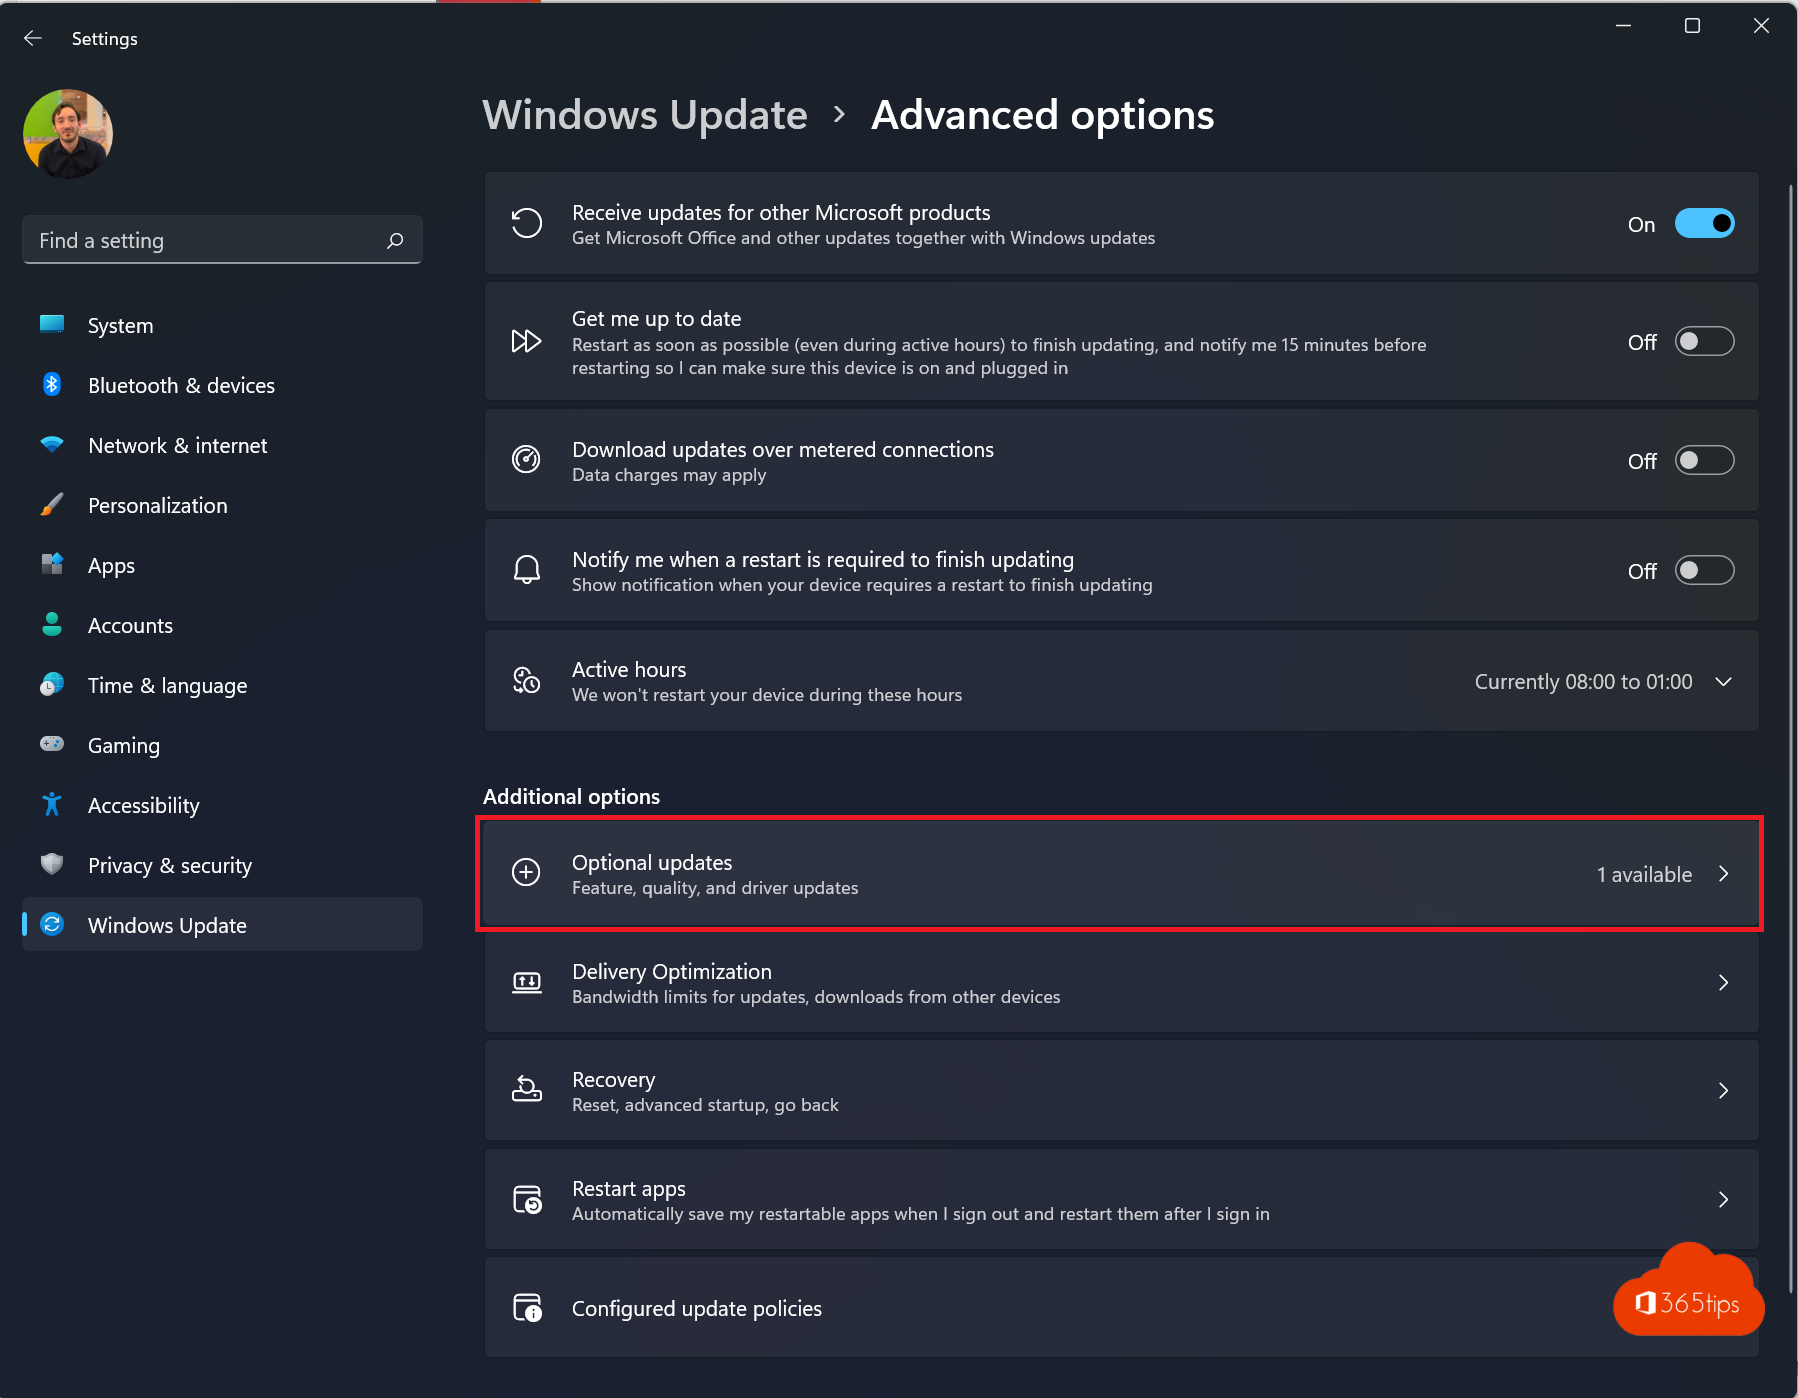 How to receive updates for other Microsoft products in Windows 11 - Optional updates